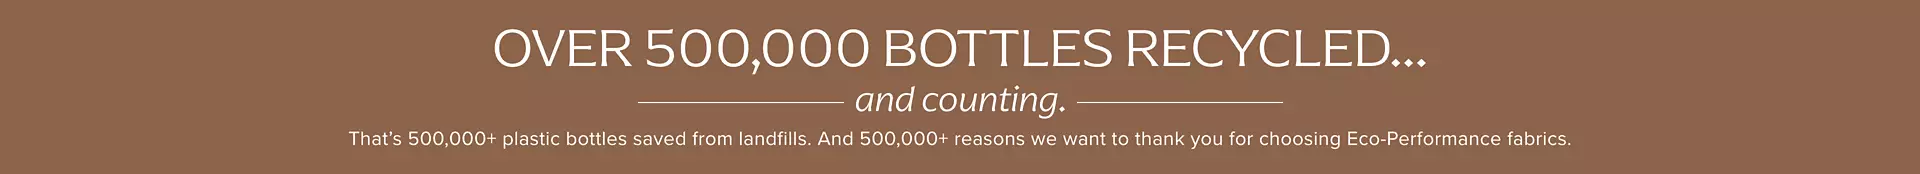 Over 500,000 bottles recycled... and counting. That's 500,000+ plastic bottles saved from landfills. And 500,000+ reason we want to thank you for choosing eco-performance fabrics.